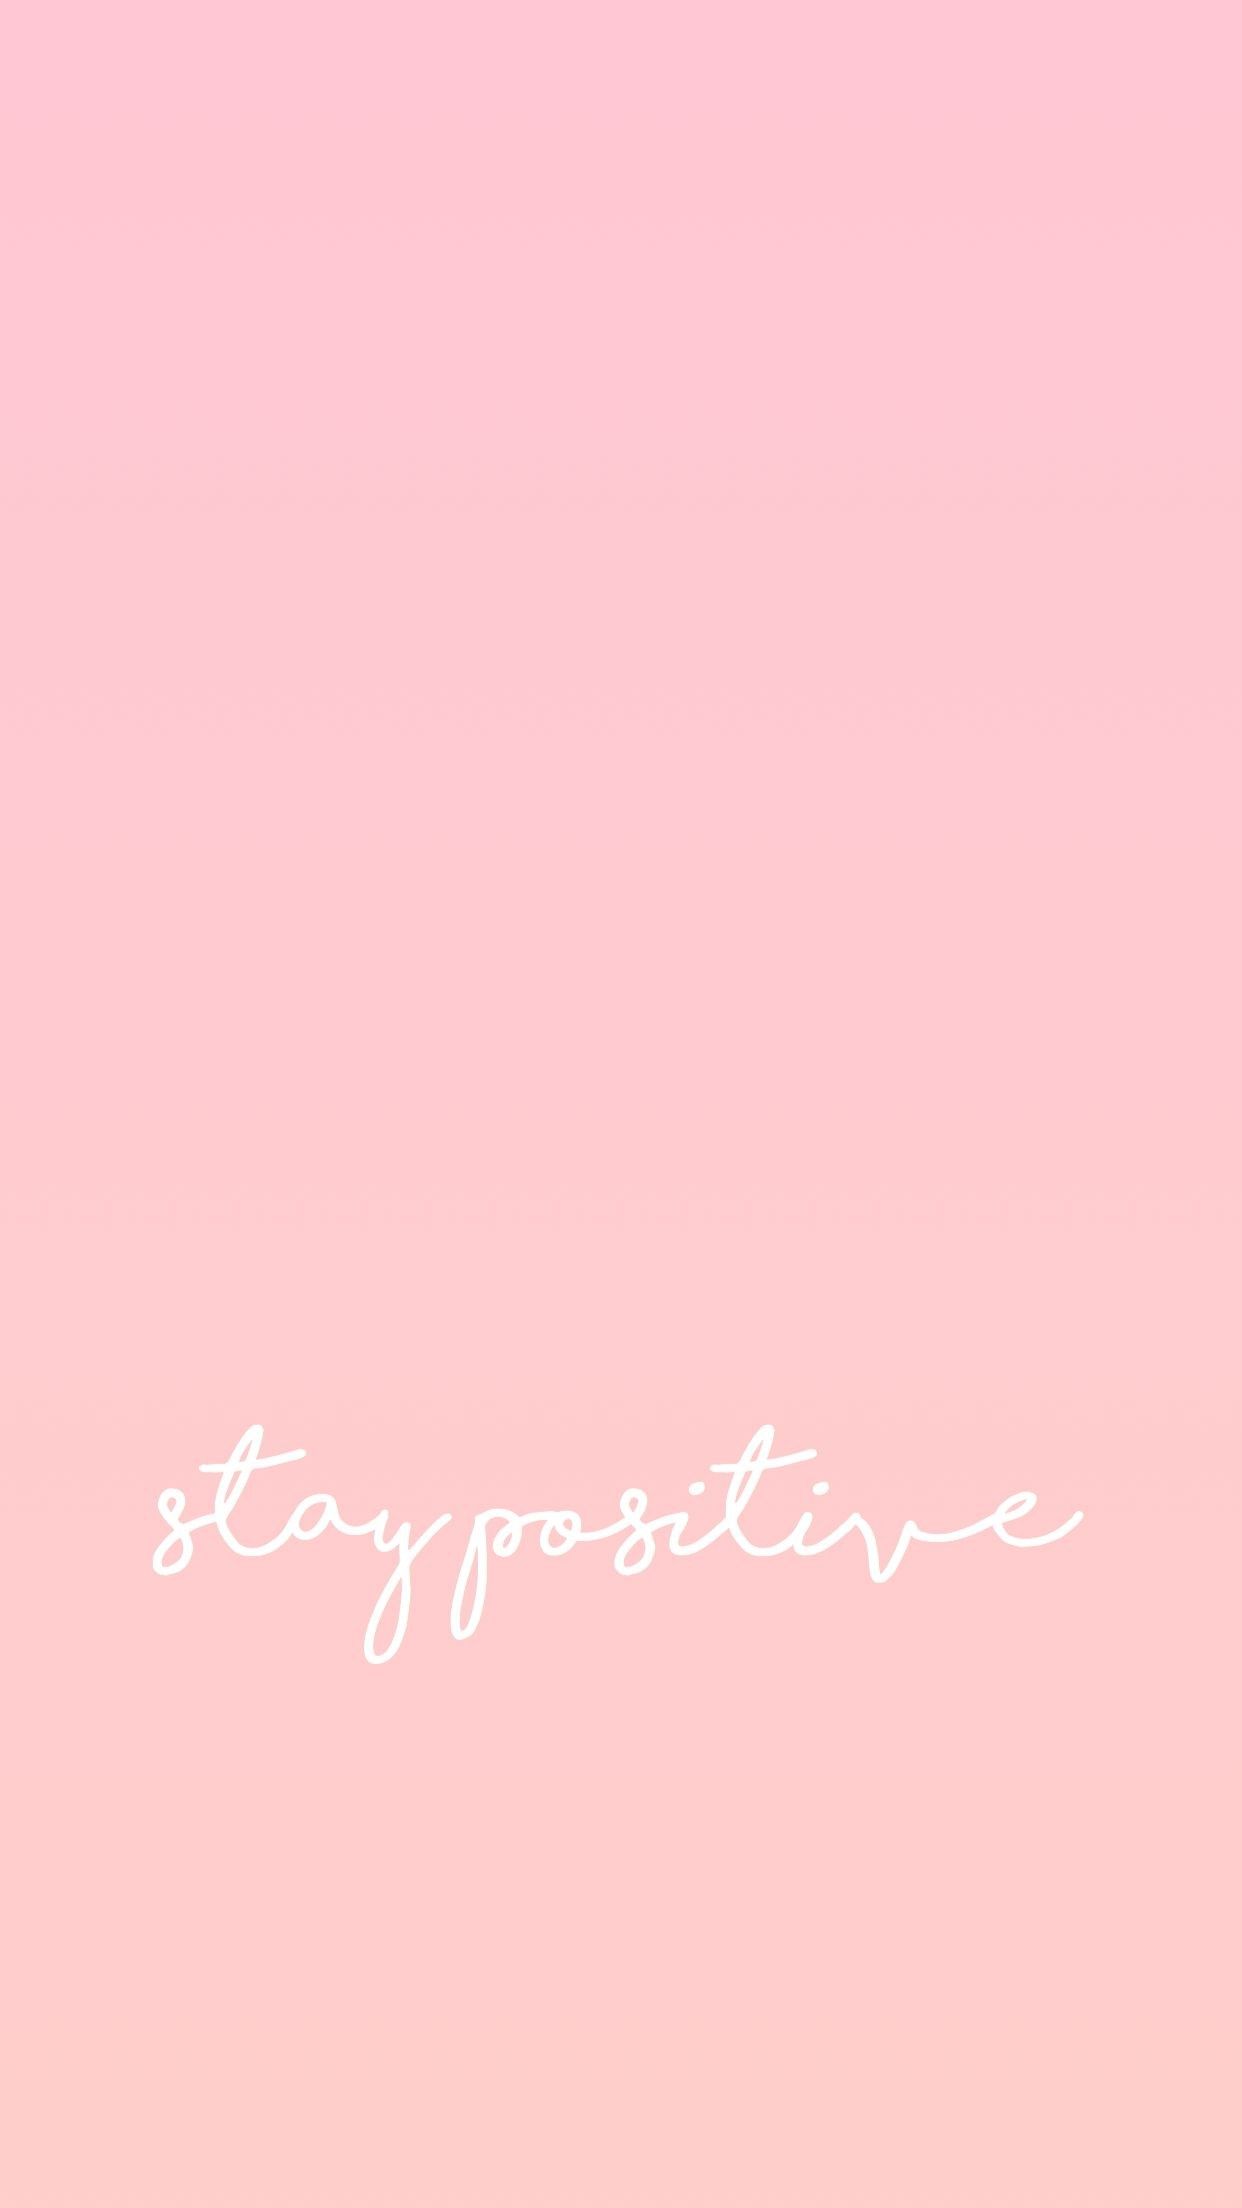 WoowPaper: Aesthetic iPhone Wallpaper Self Love Quotes